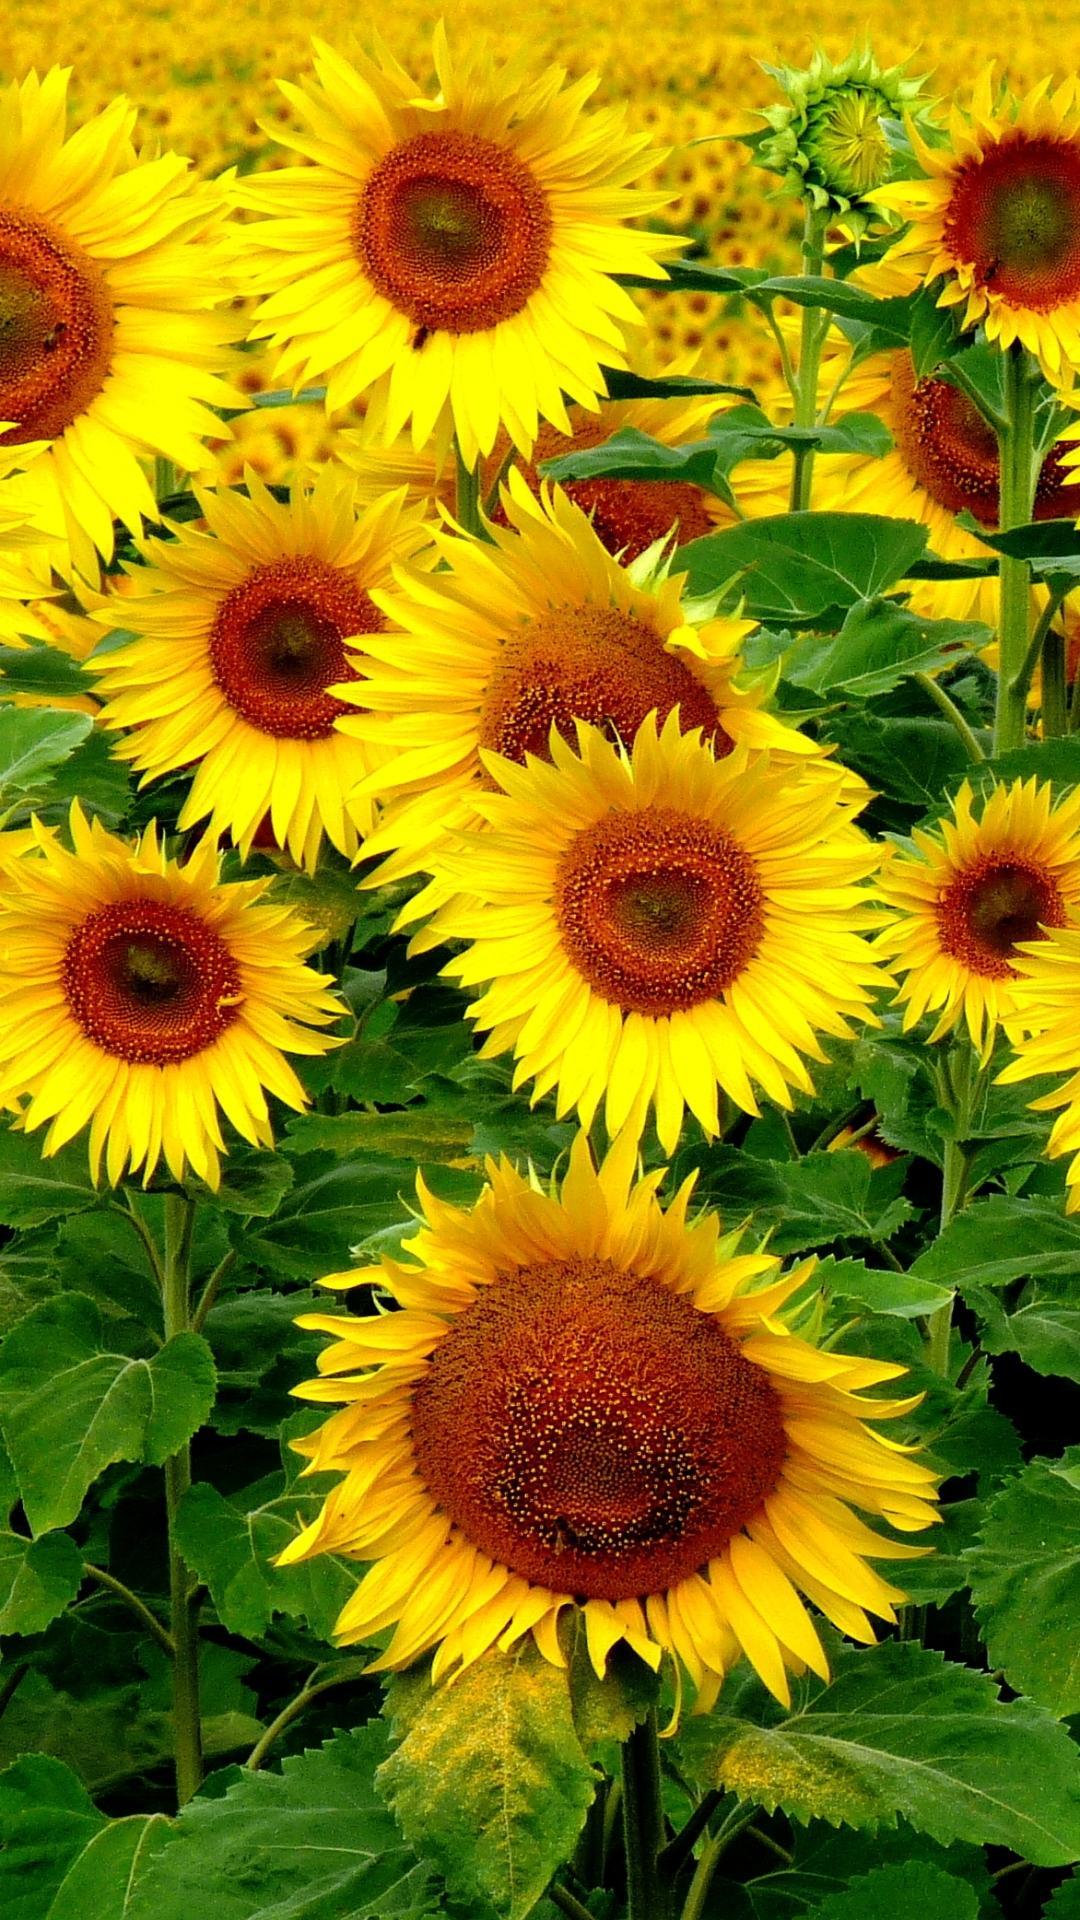 Sunflower HD Wallpaper for Android